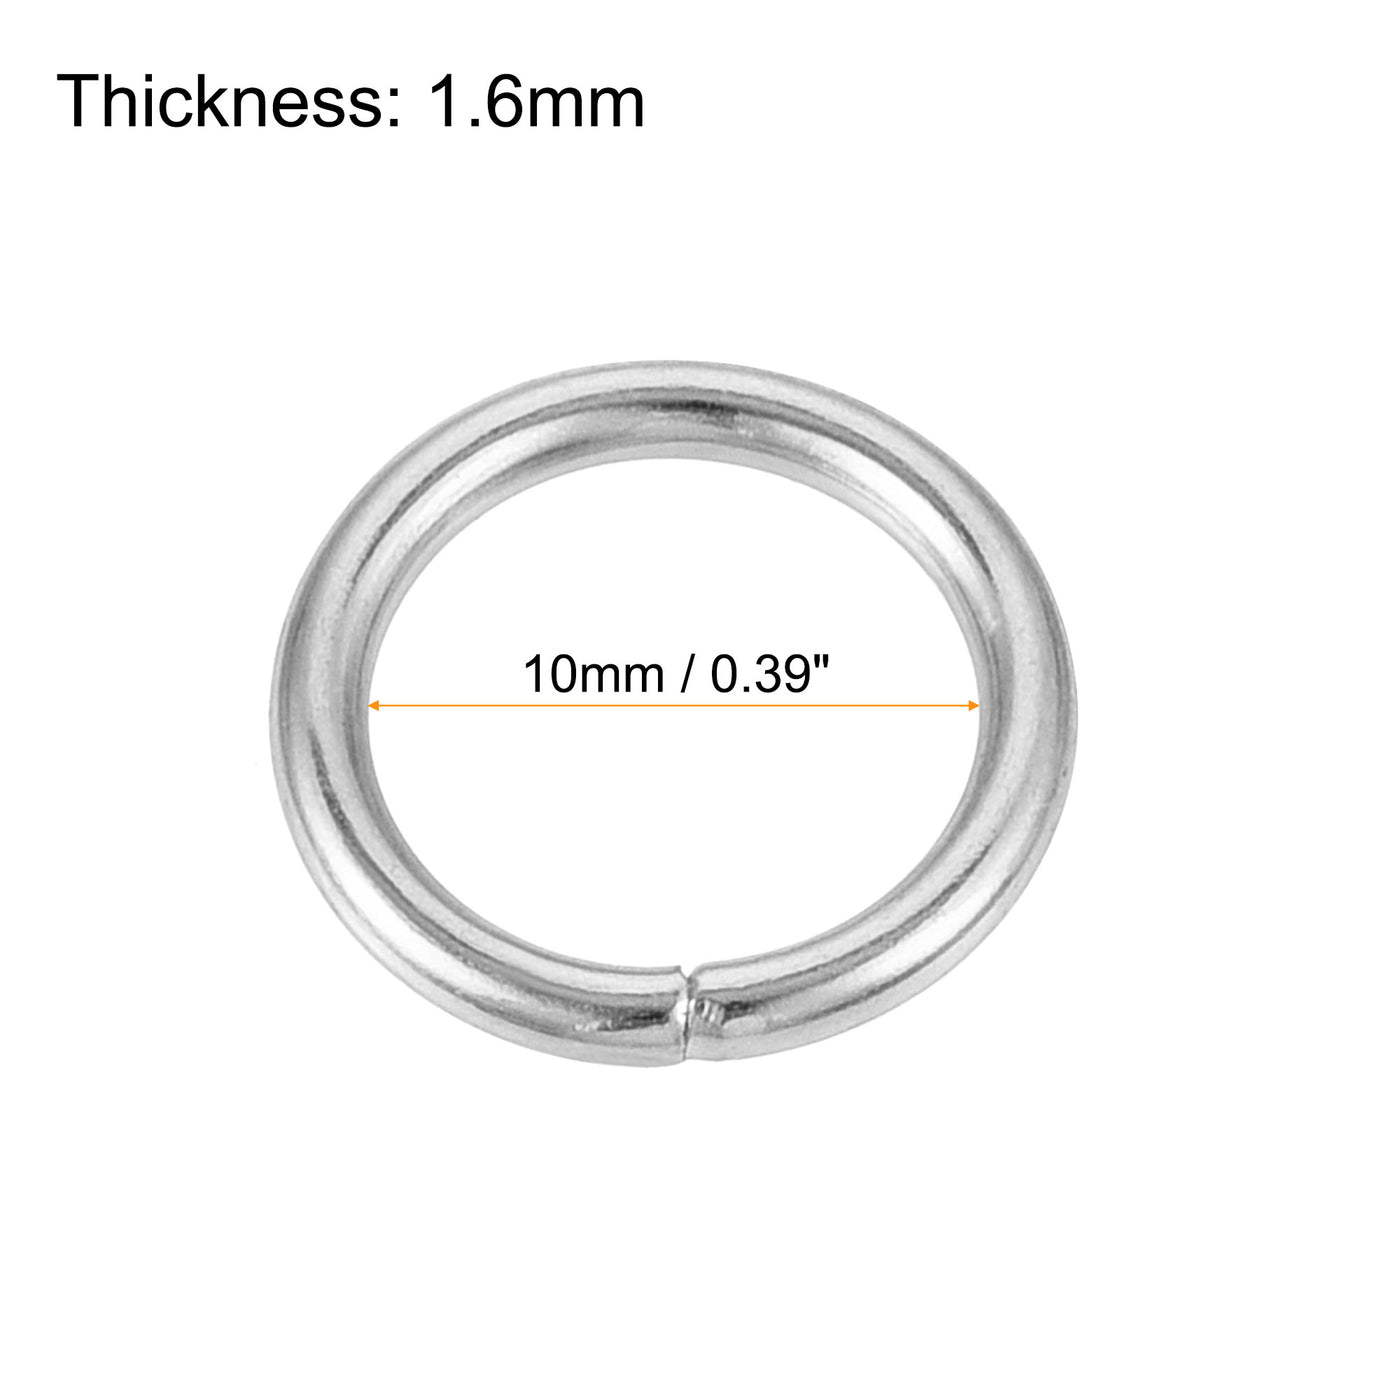 uxcell Uxcell 10mm Metal O Rings Non-Welded for Straps Bags Belts DIY Silver Tone 50pcs